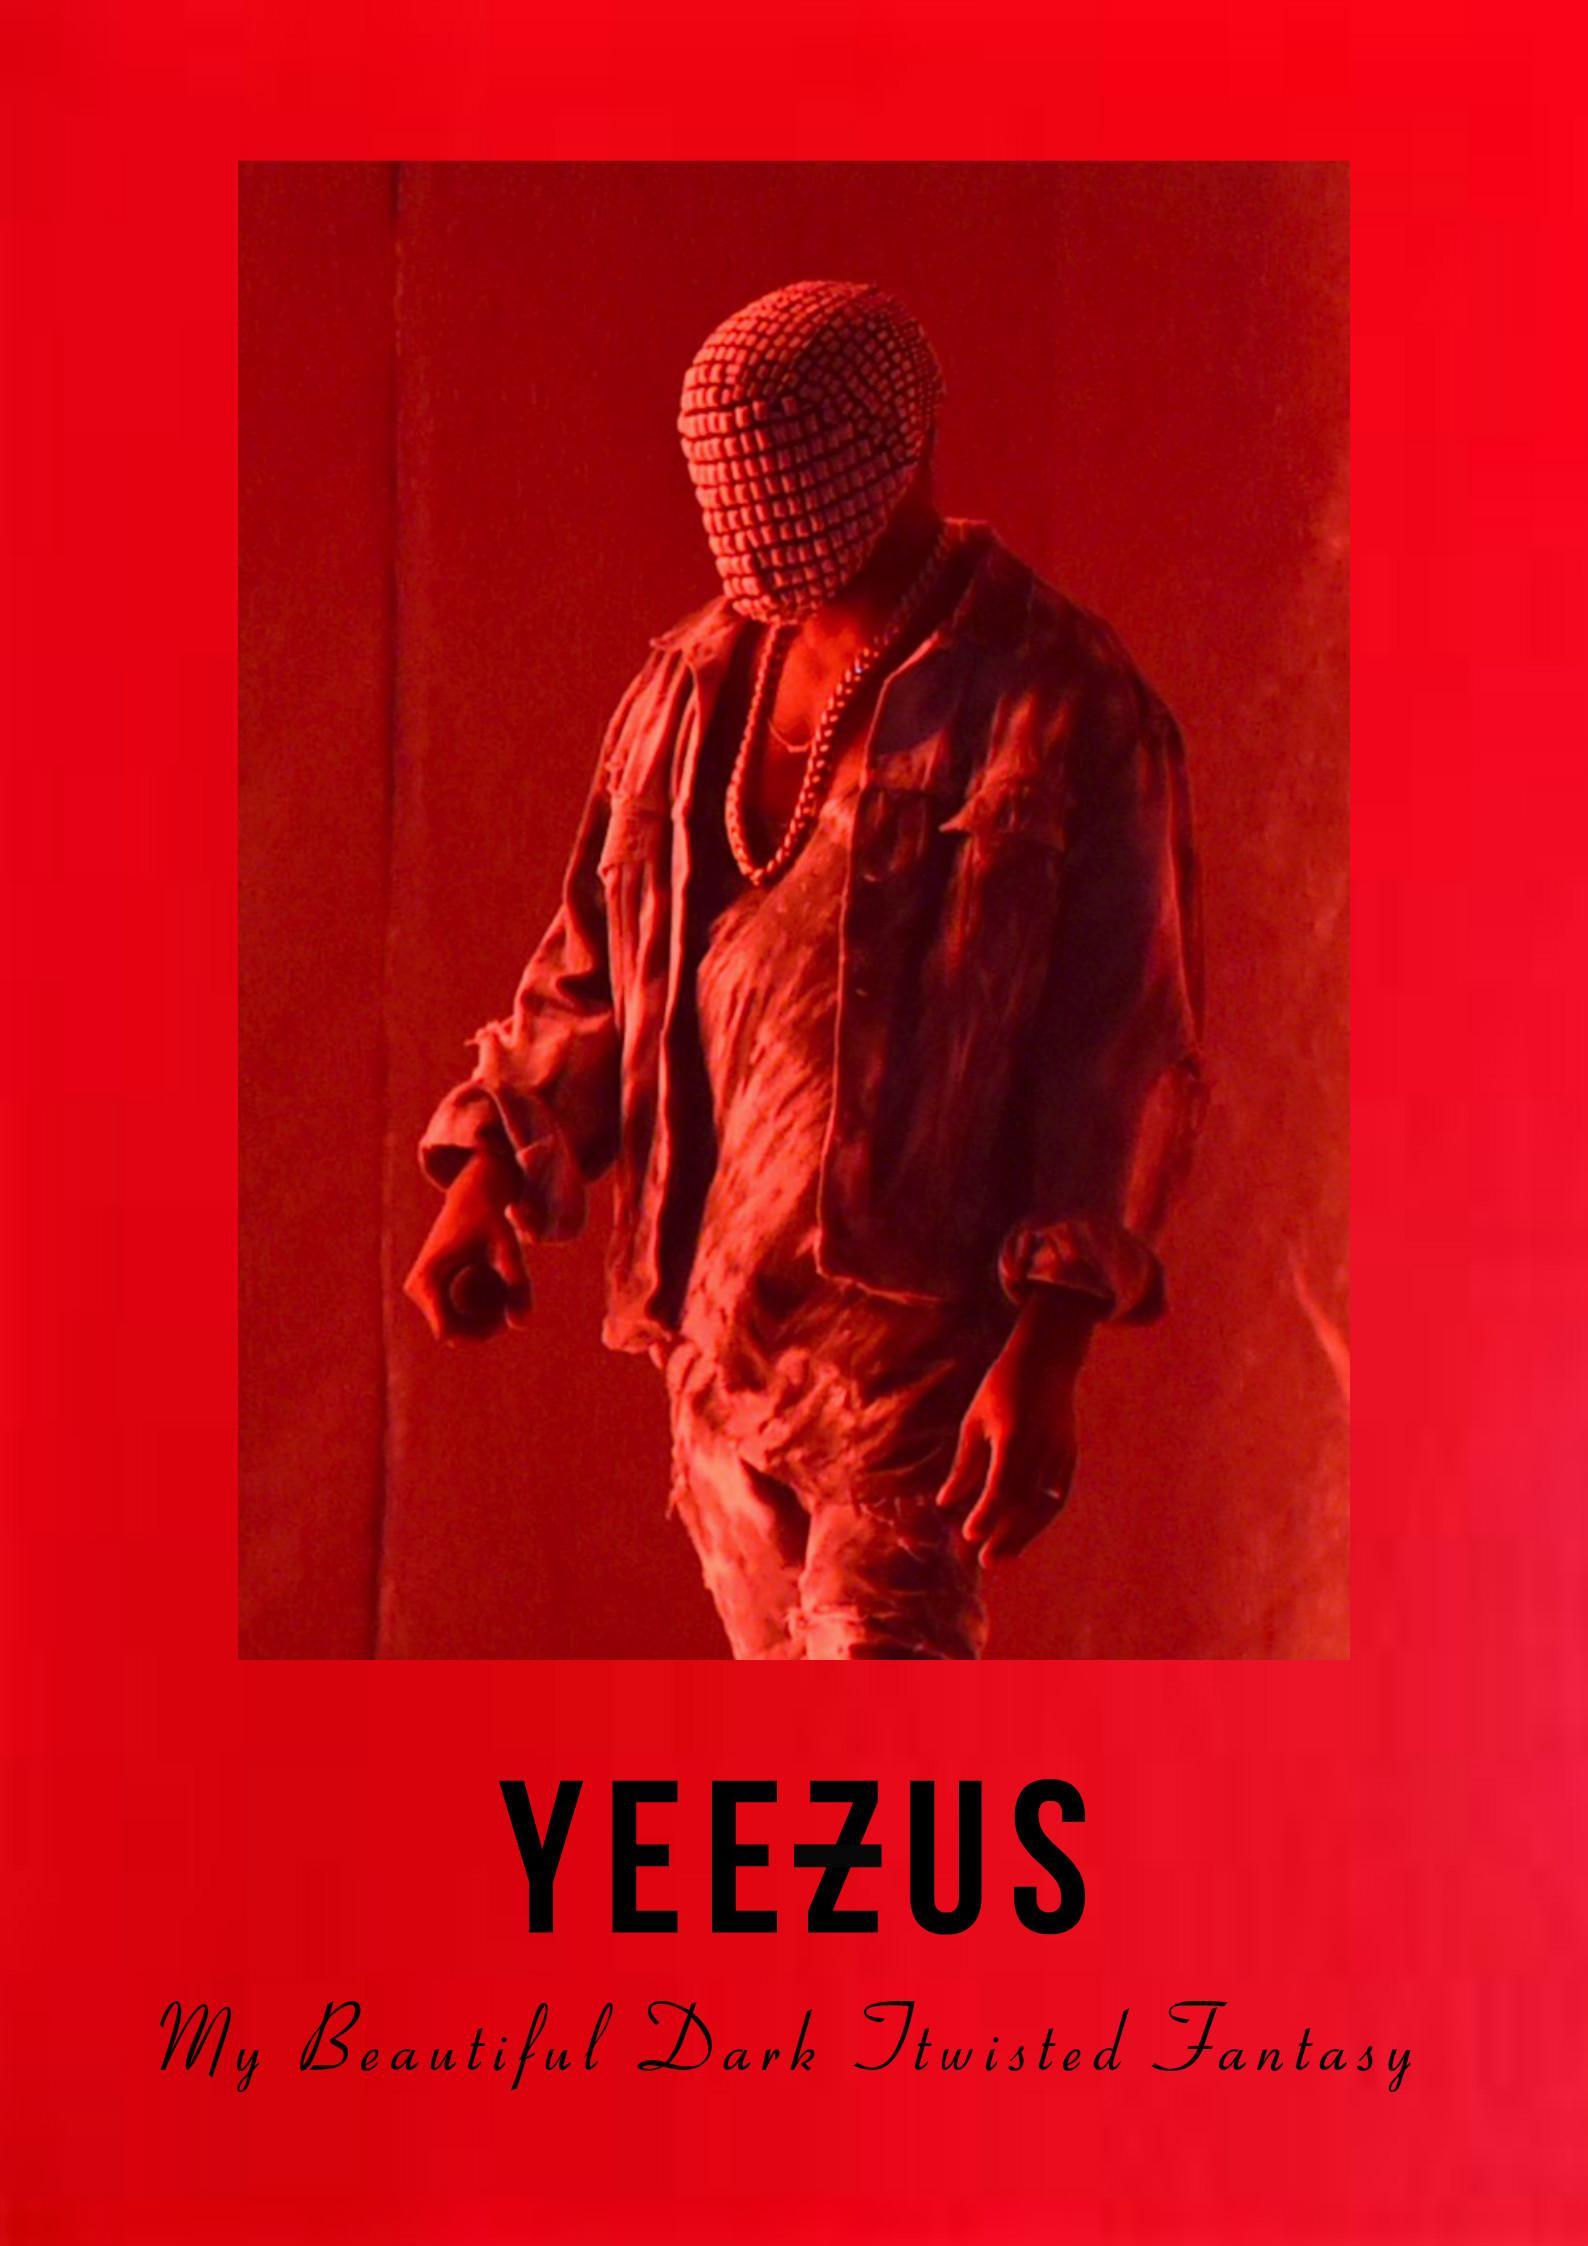 MBDTF Poster / IPhone Wallpaper I Made, Thought You Guys Would Like